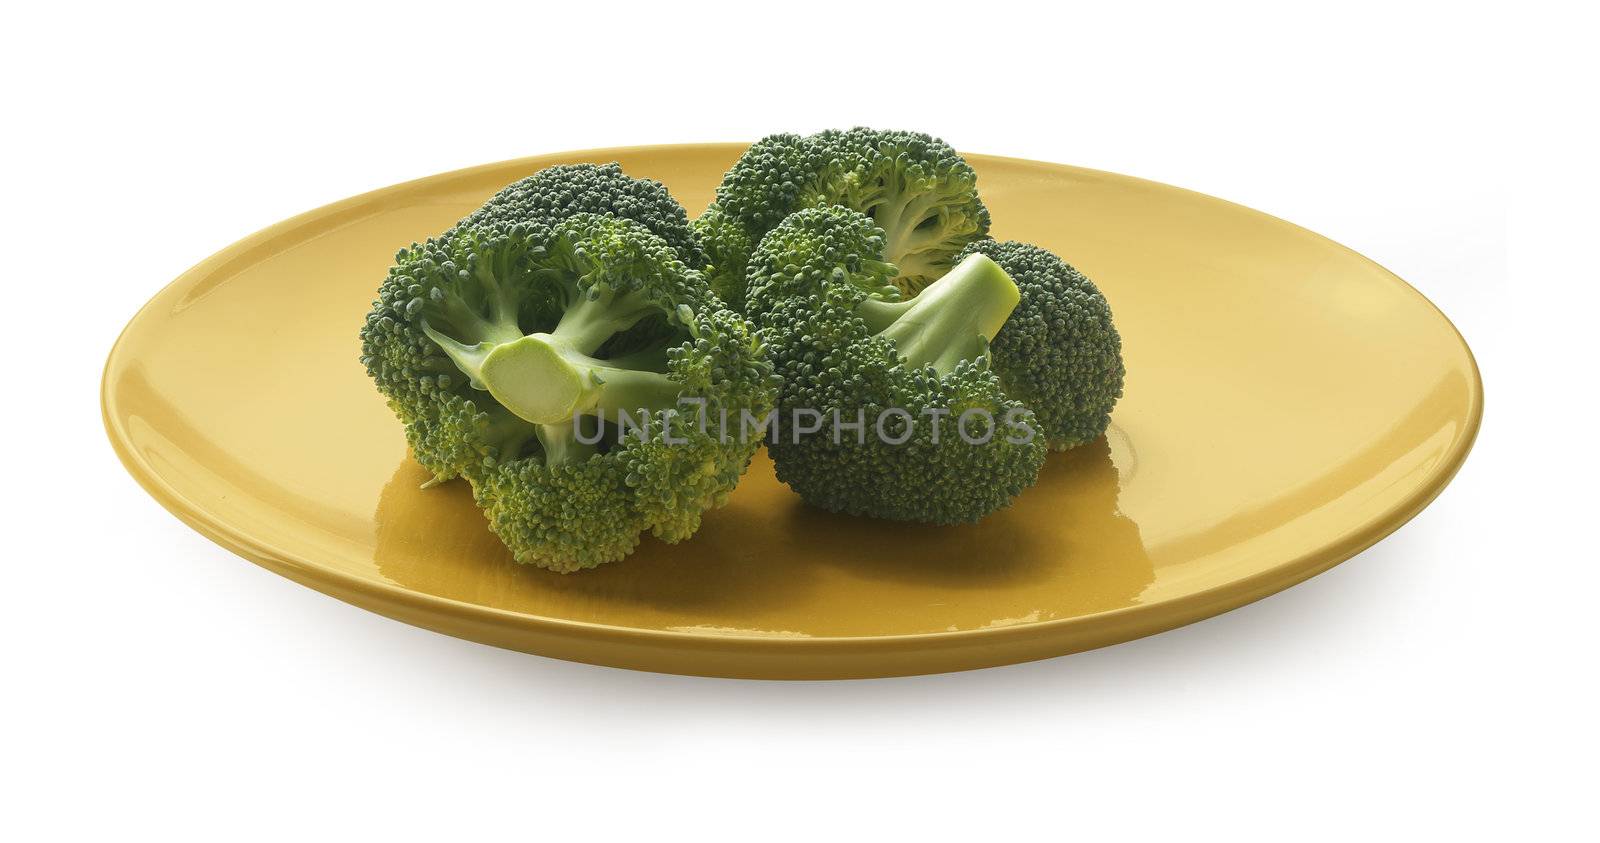 Some pieces of broccoli on the yellow plate